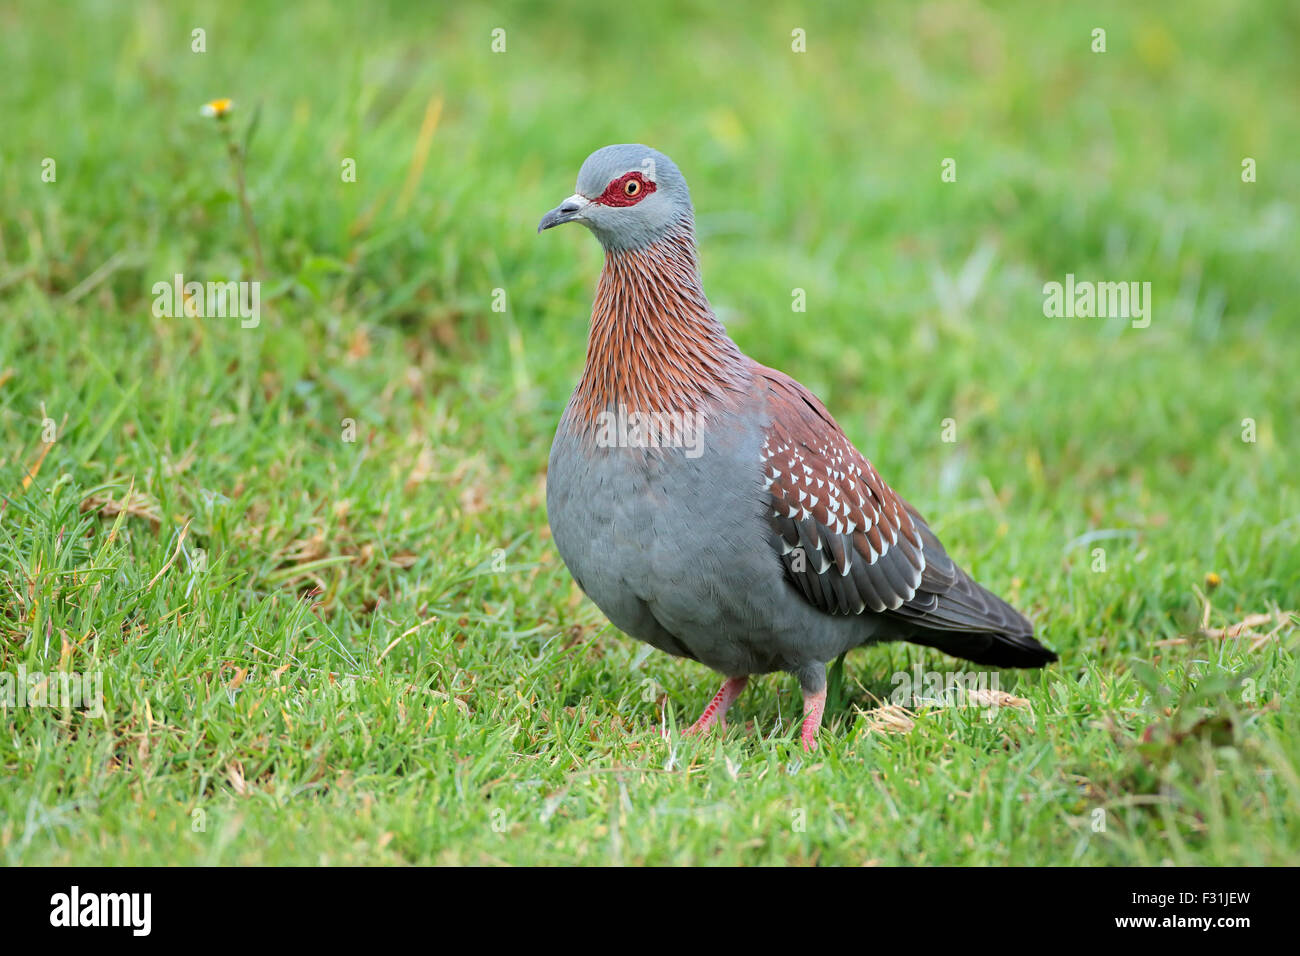 A rock pigeon (Columba guinea) sitting on green grass, South Africa Stock Photo